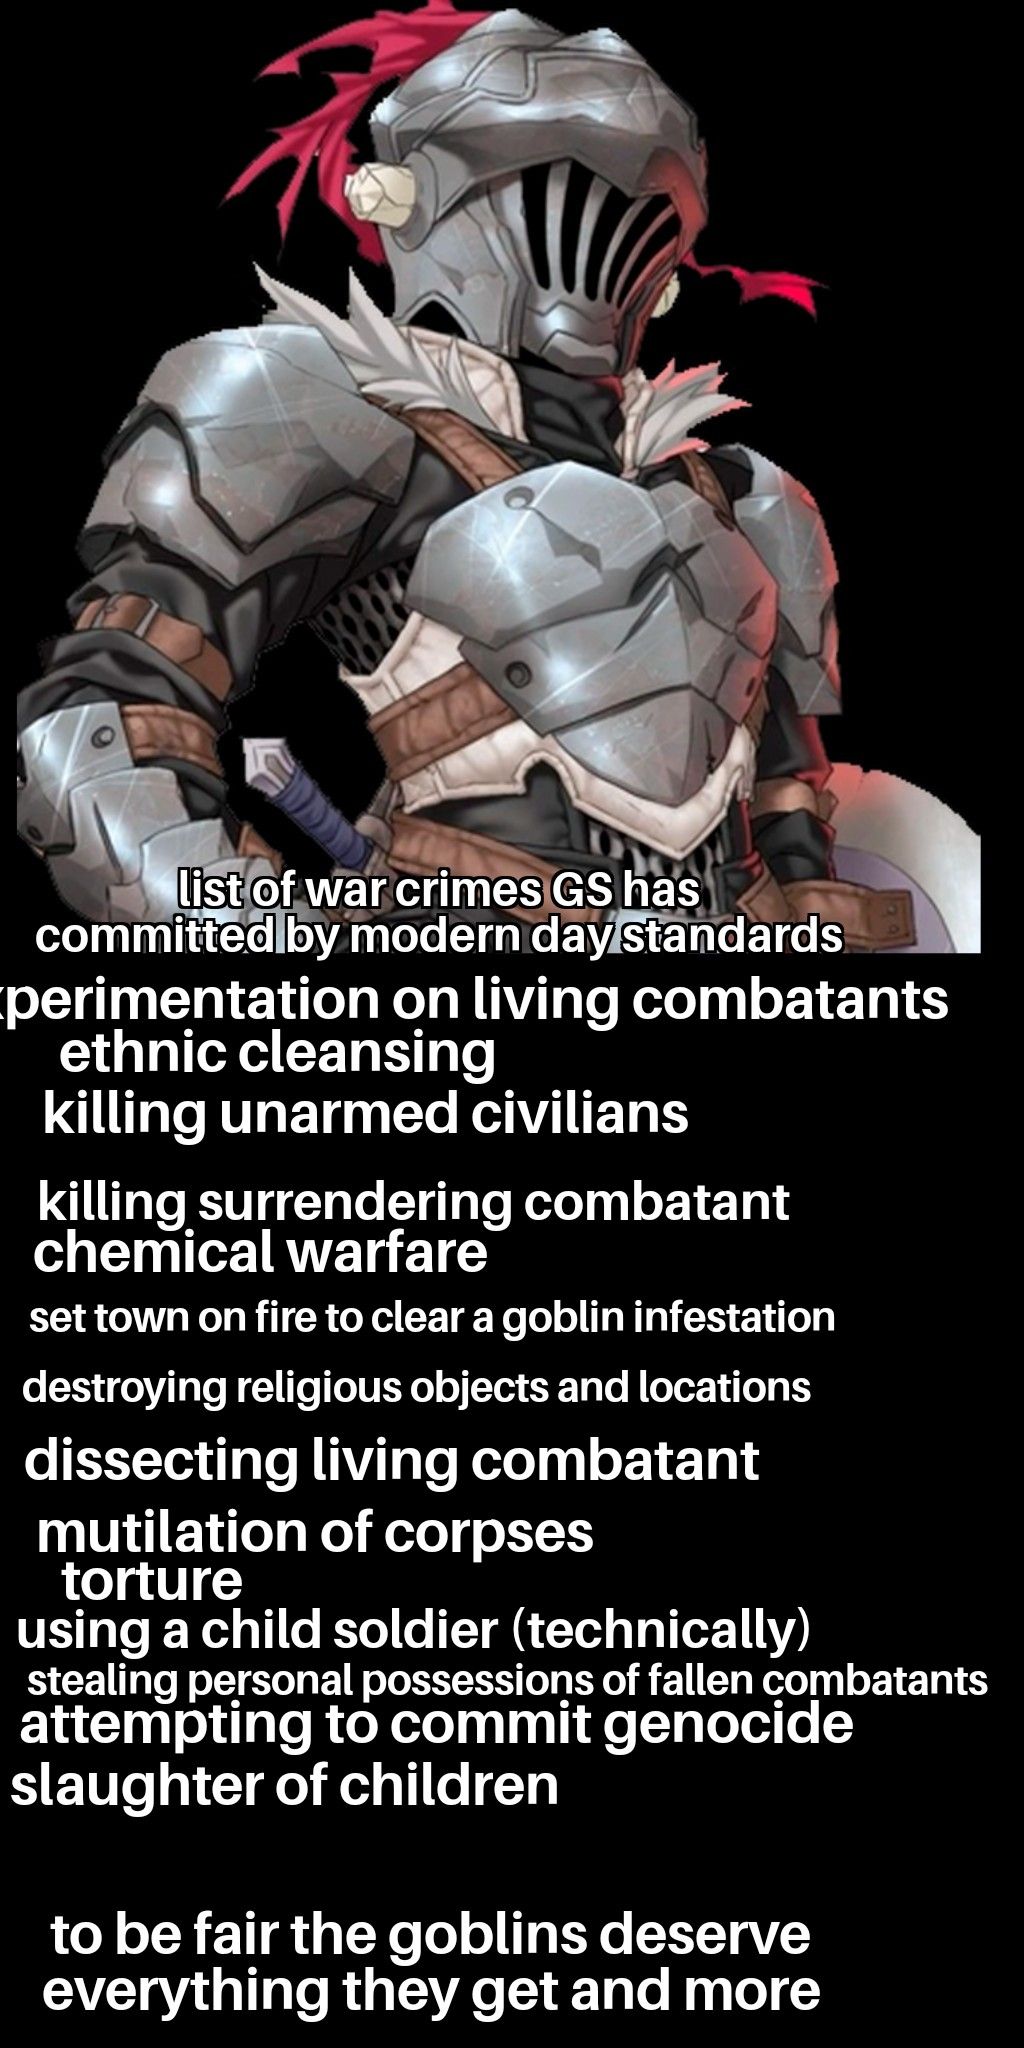 Goblin slayer did nothing wrong